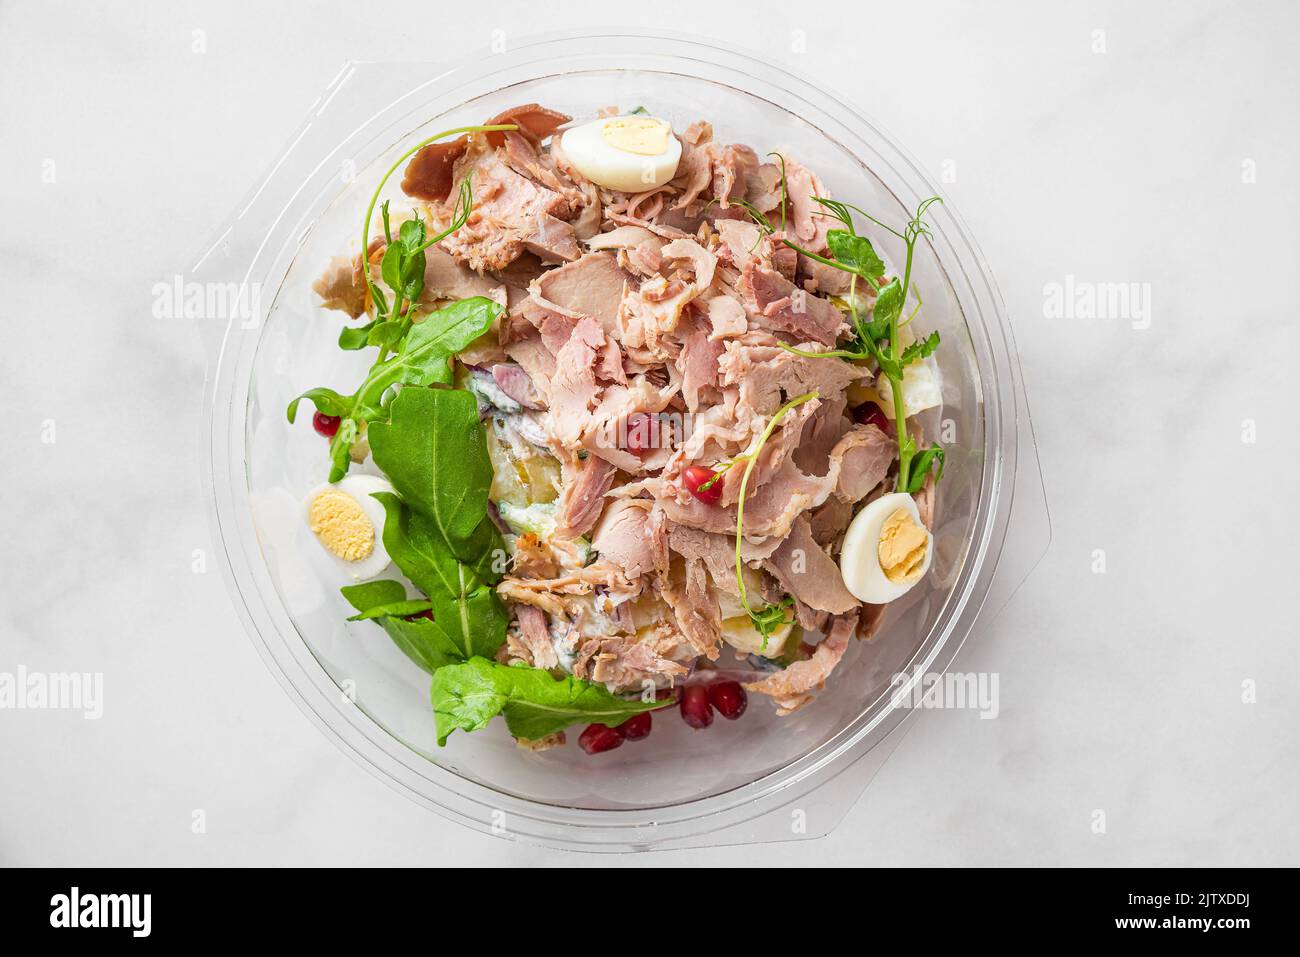 Healthy baked ham salad with arugula, potato, eggs, pomegranate in plastic package container for take away. Food in lunch box. Top view Stock Photo